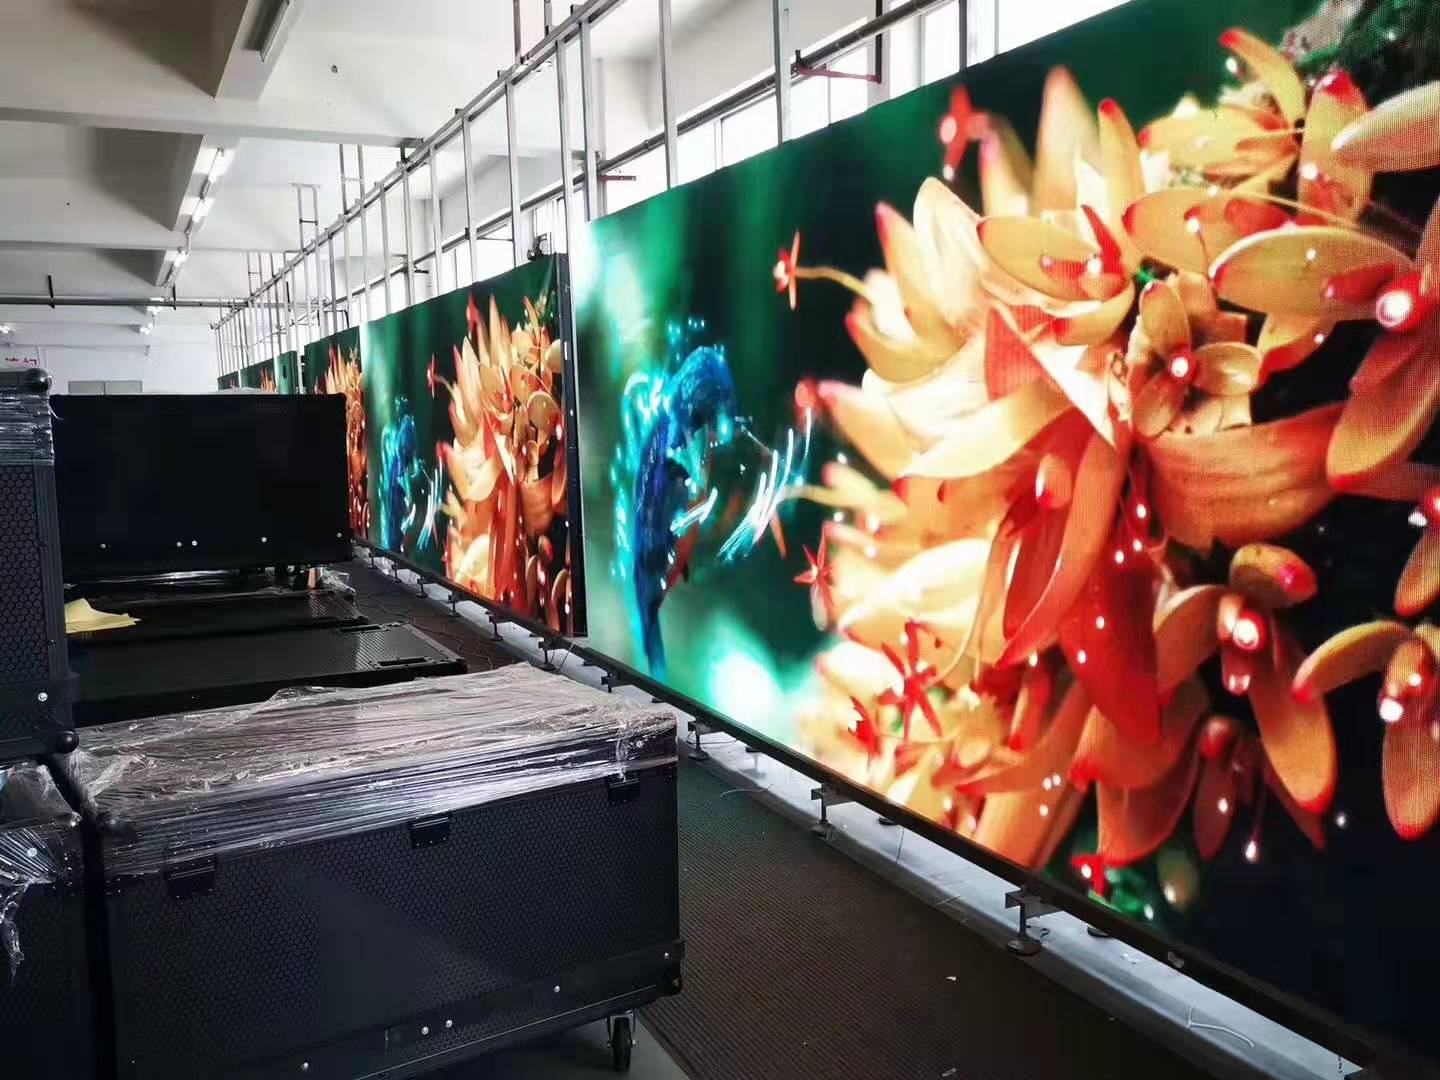 honghe adds another wonderful 220 square meters, 500mm x 500mm indoor p2.976 led stage rental screen, which will be delivered to Nigeria soon after aging